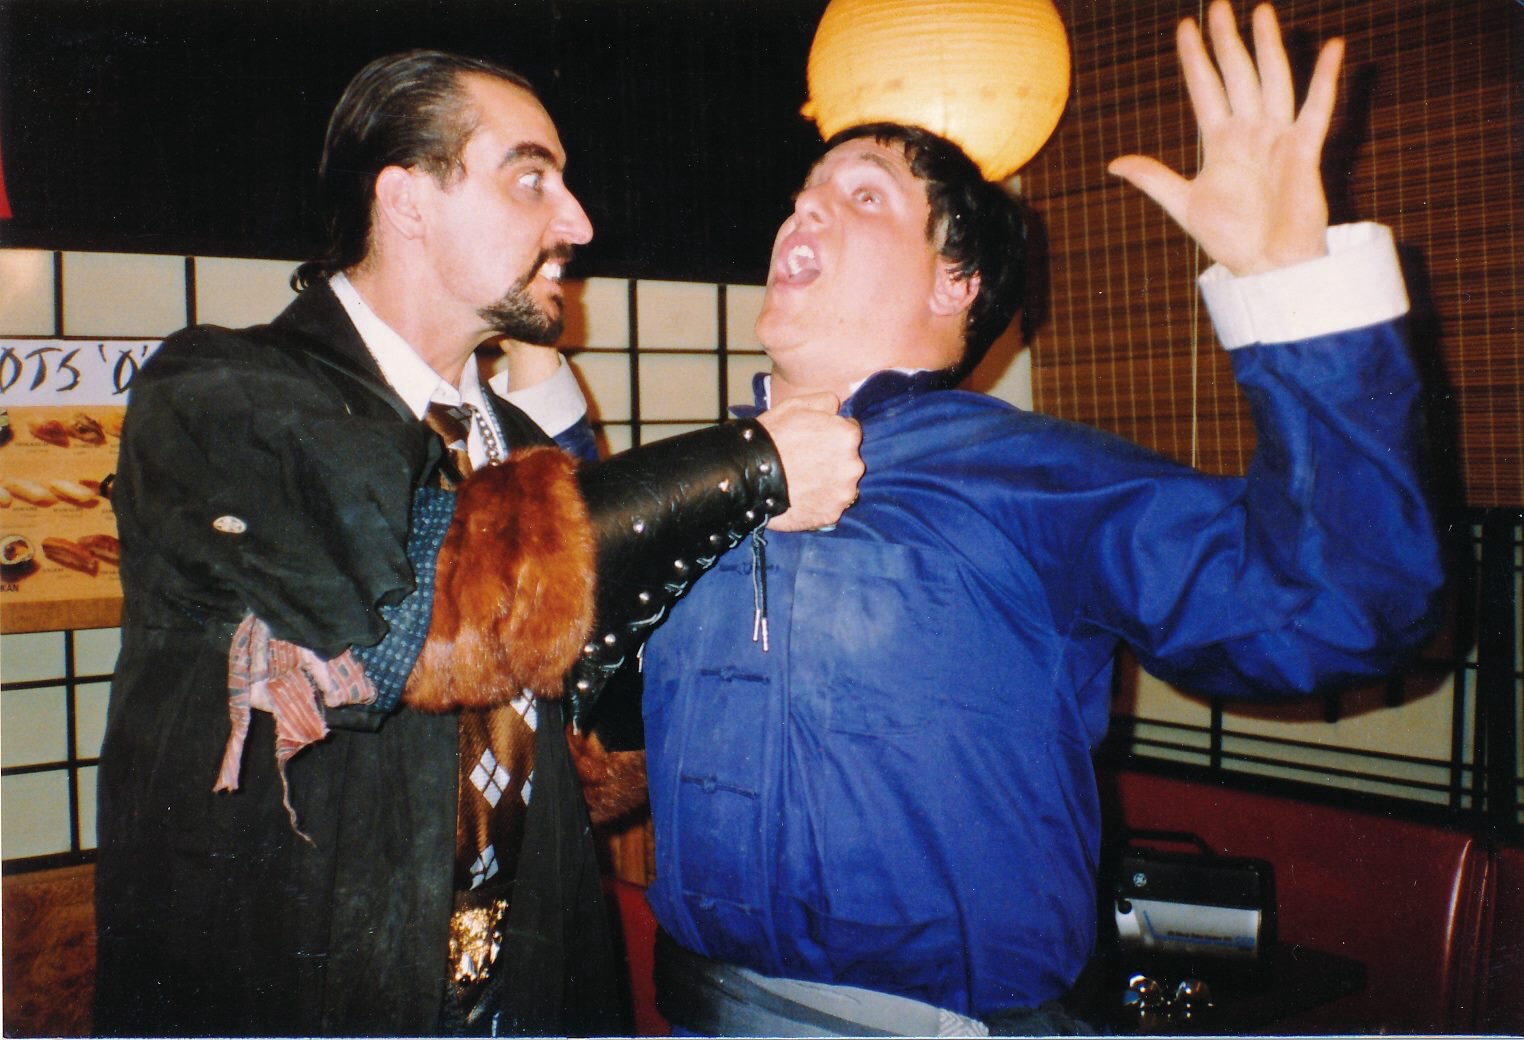 HAMMING IT UP BEHIND THE SCENES OF KUNG FU RASCALS